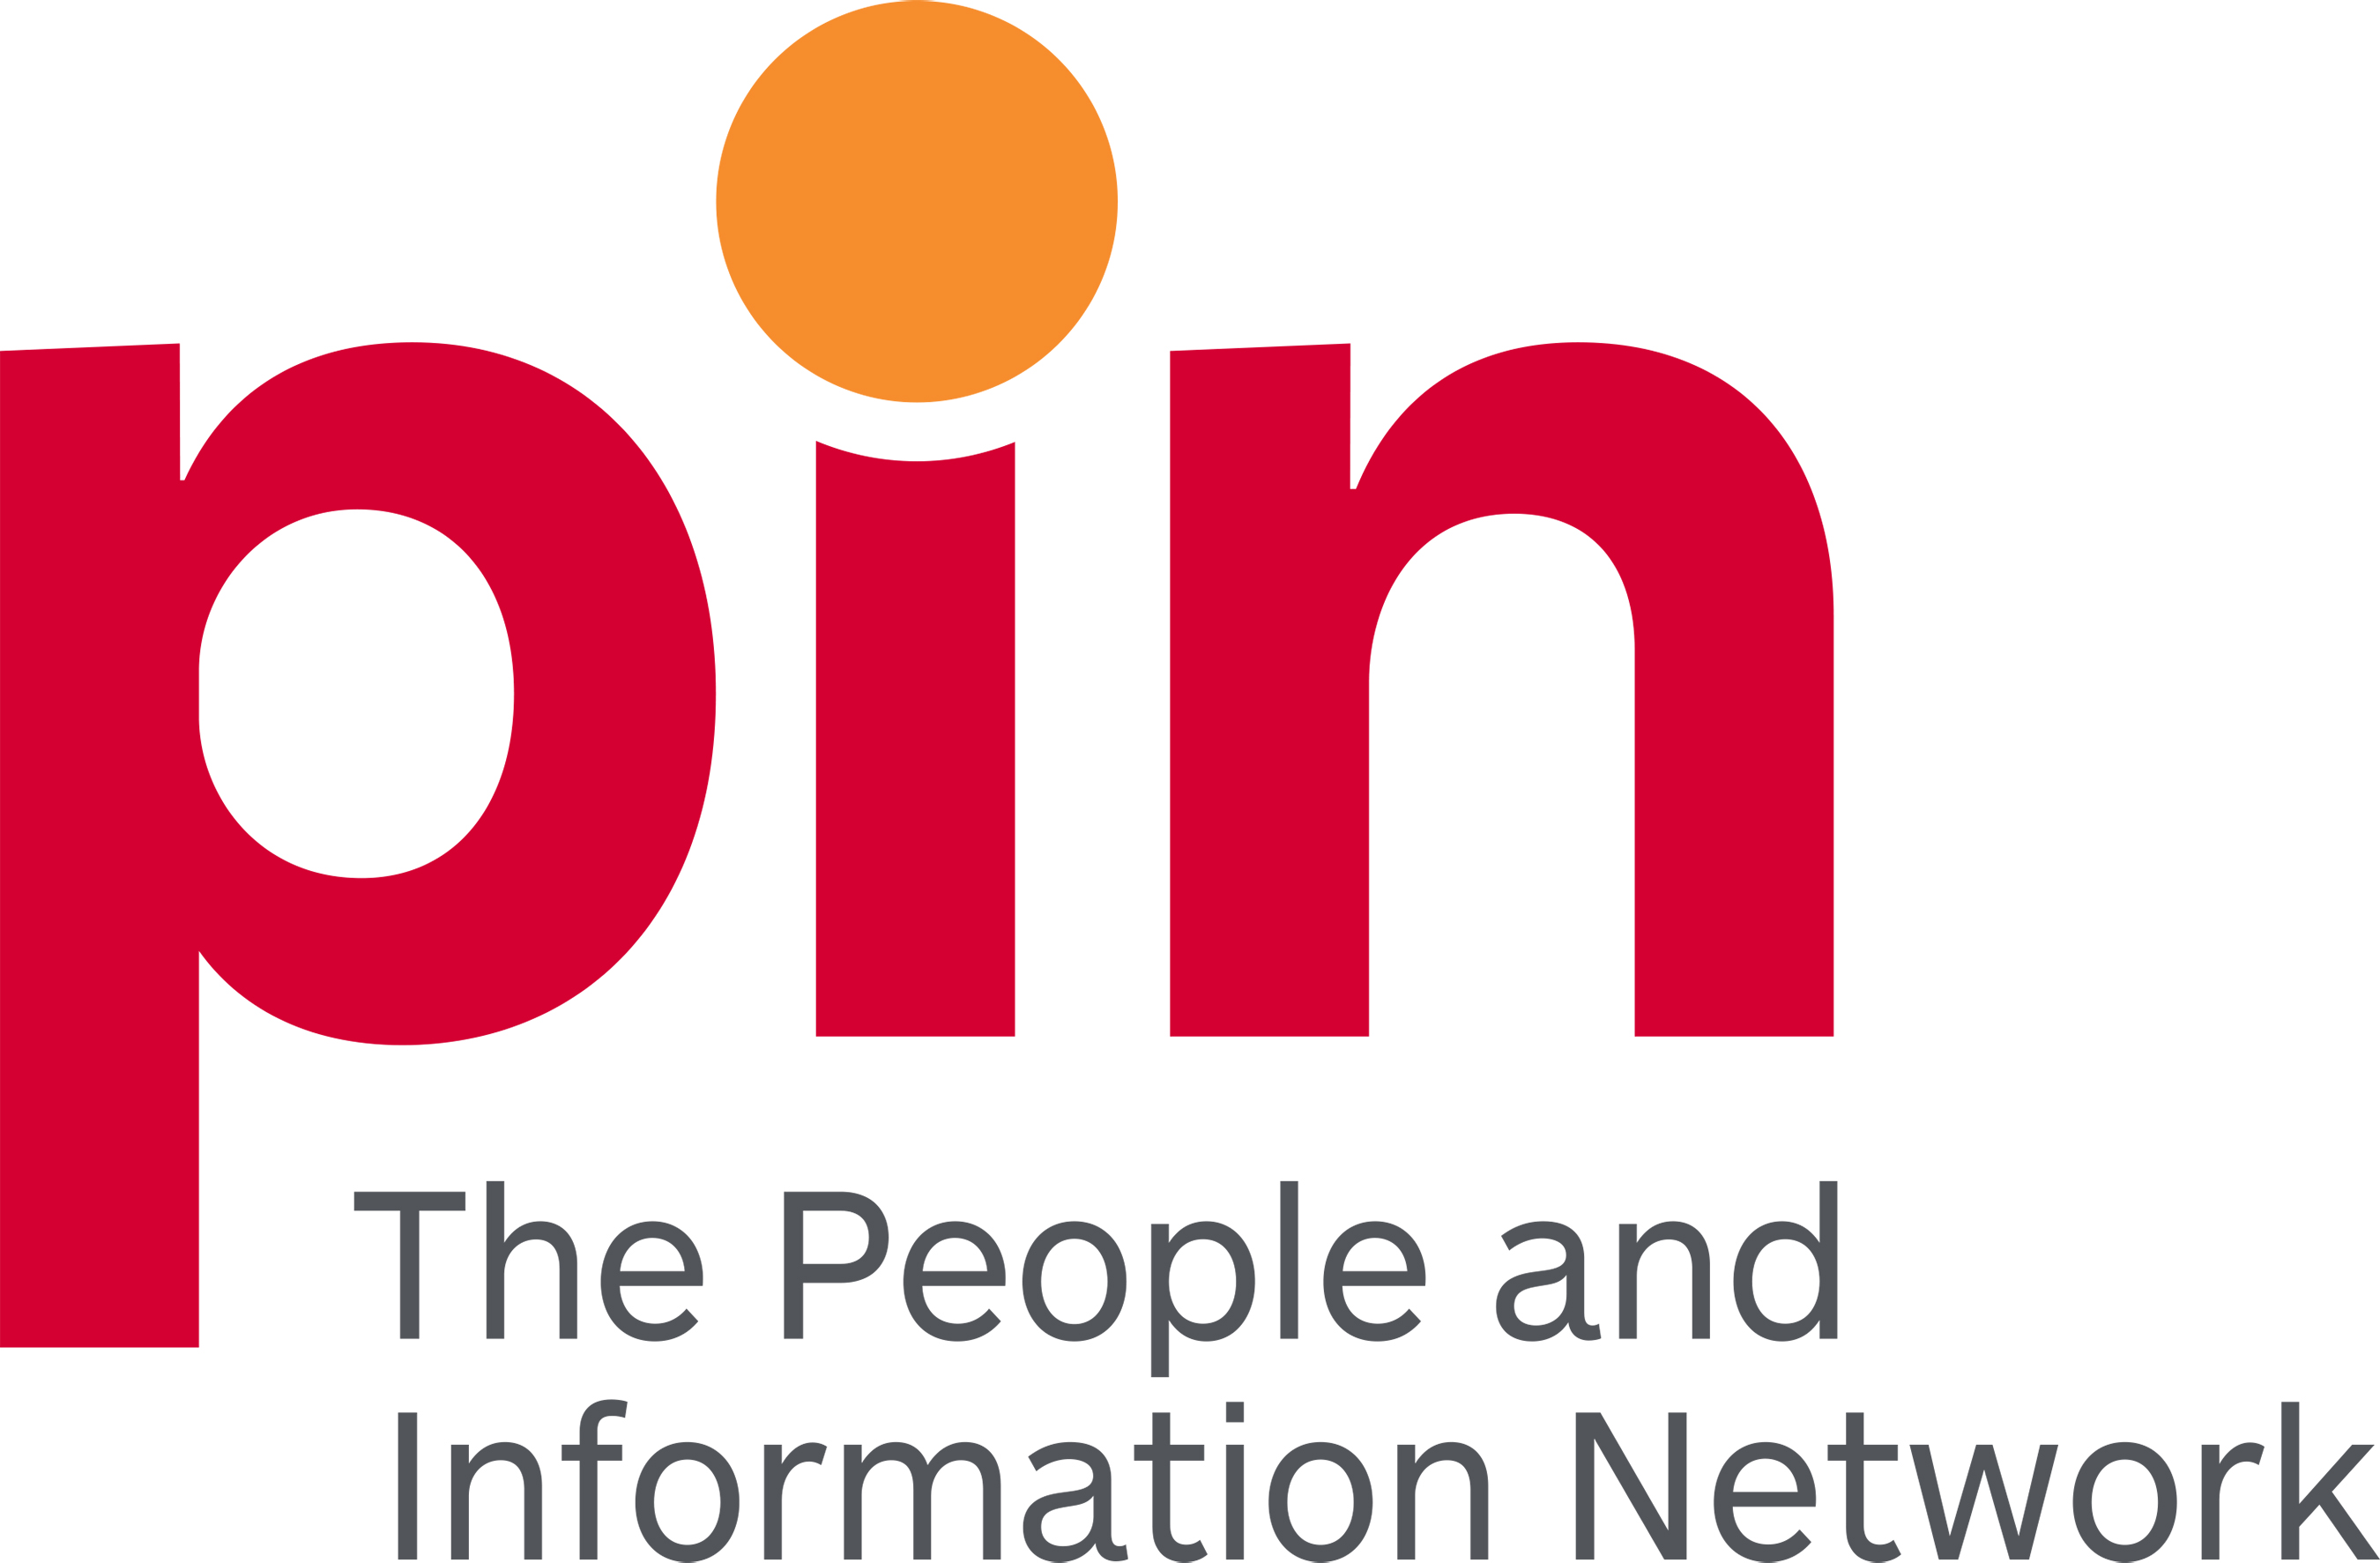 The People and Information Network